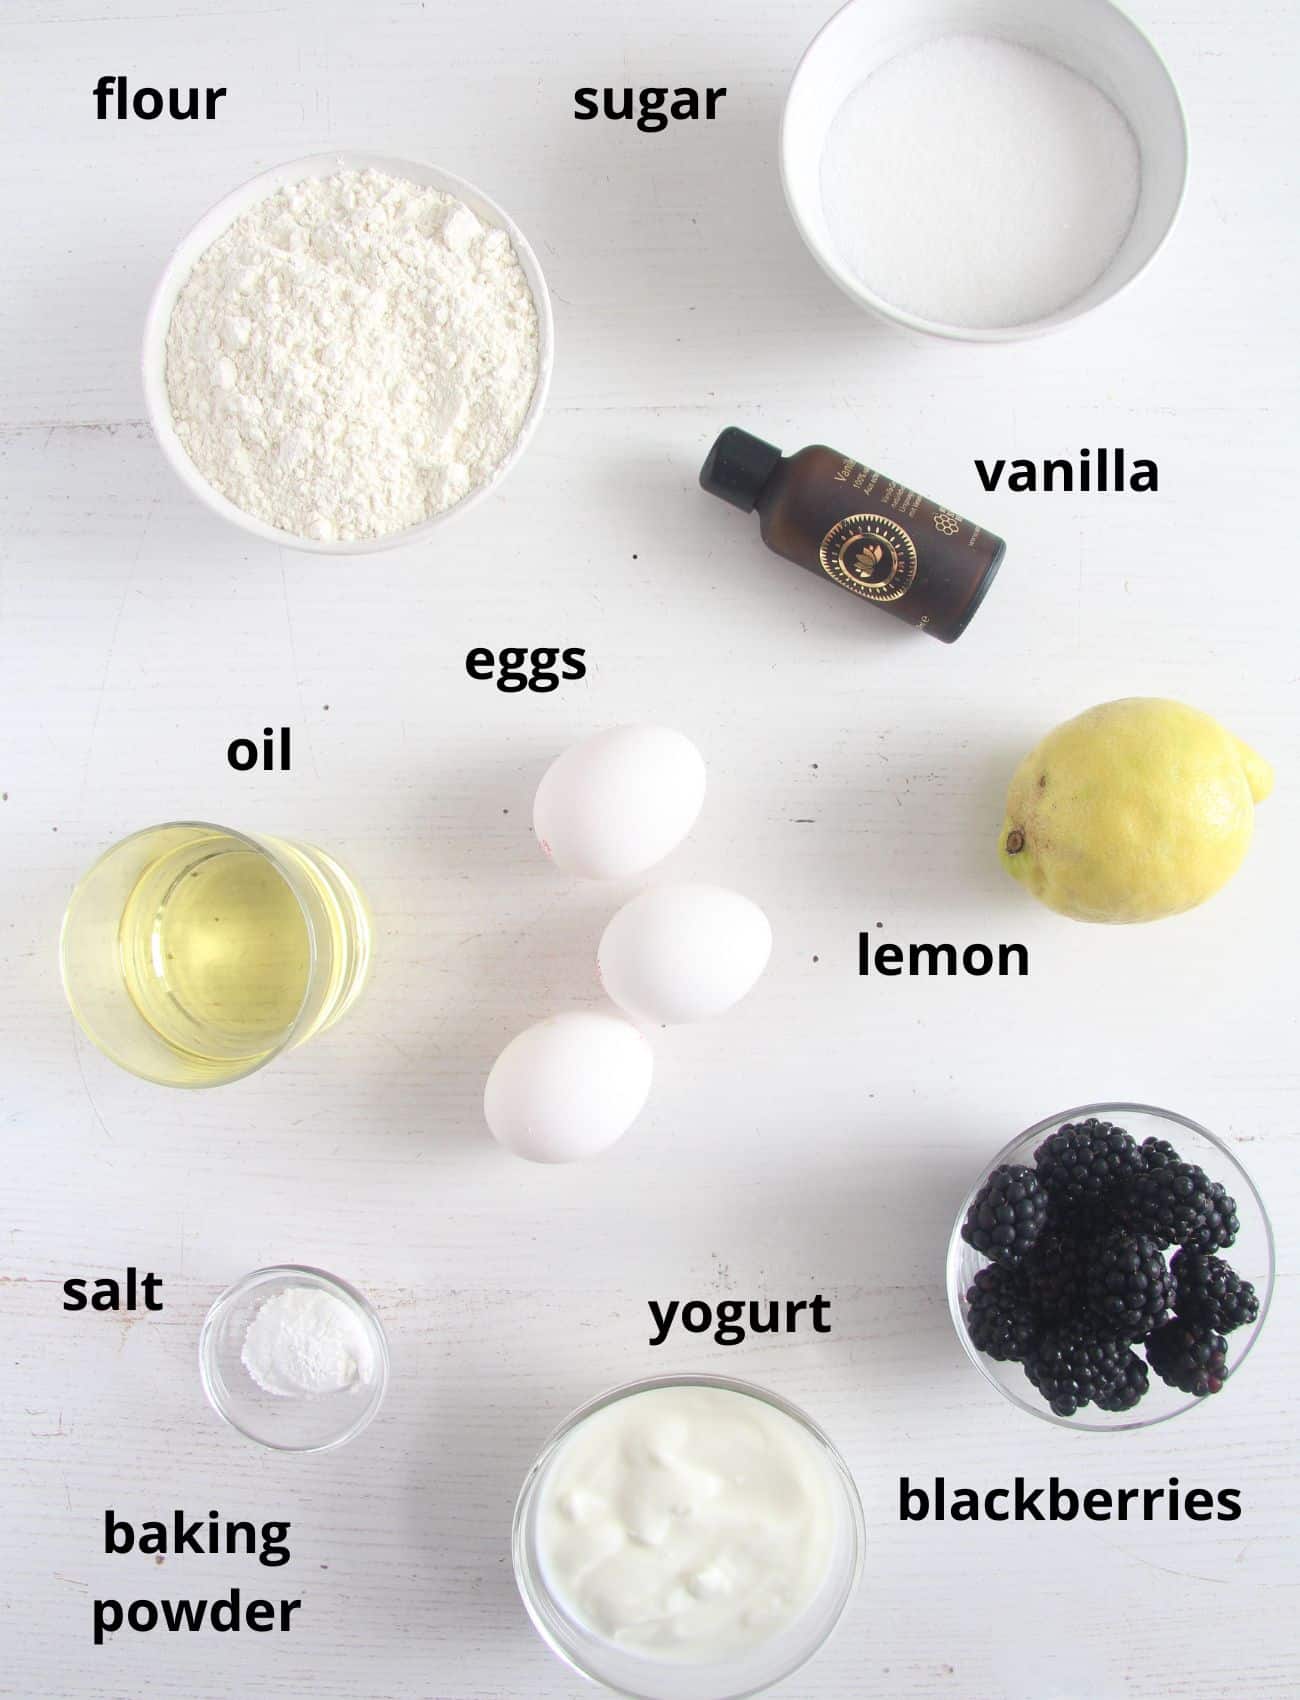 listed ingredients for making bread with blackberries and lemon on the table.